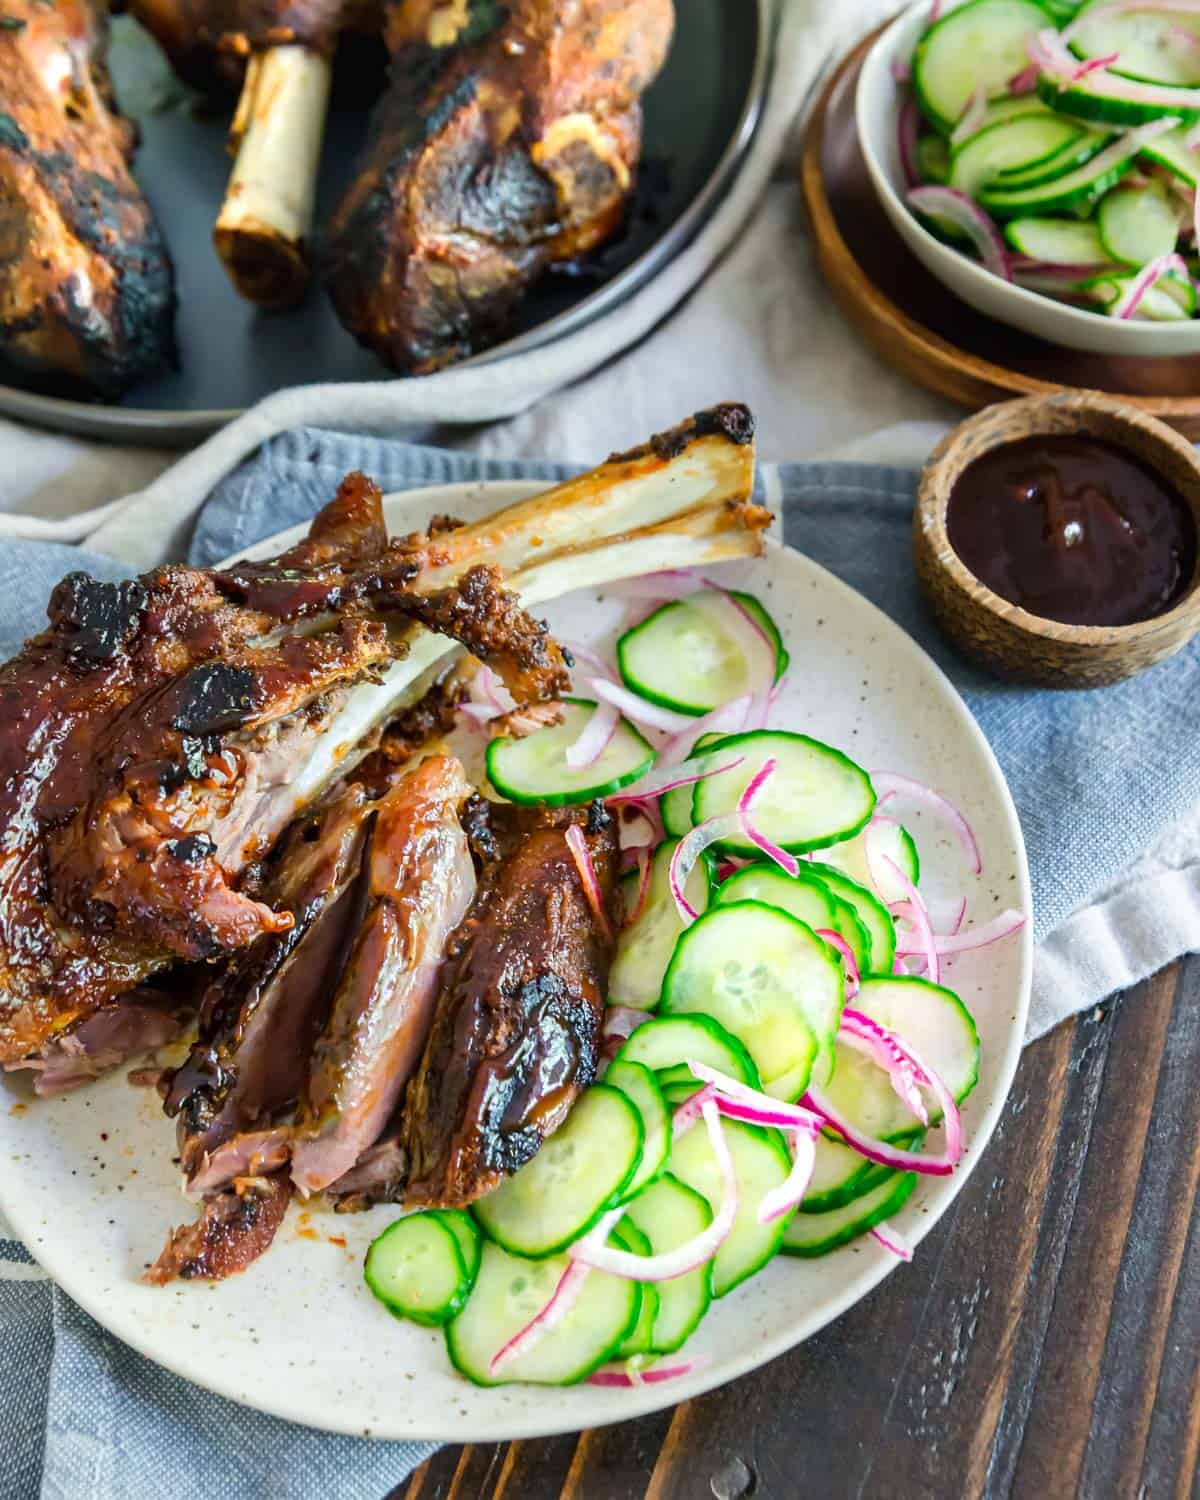 Fall off the bone tender, these BBQ lamb shanks are a delicious meaty summer meal.